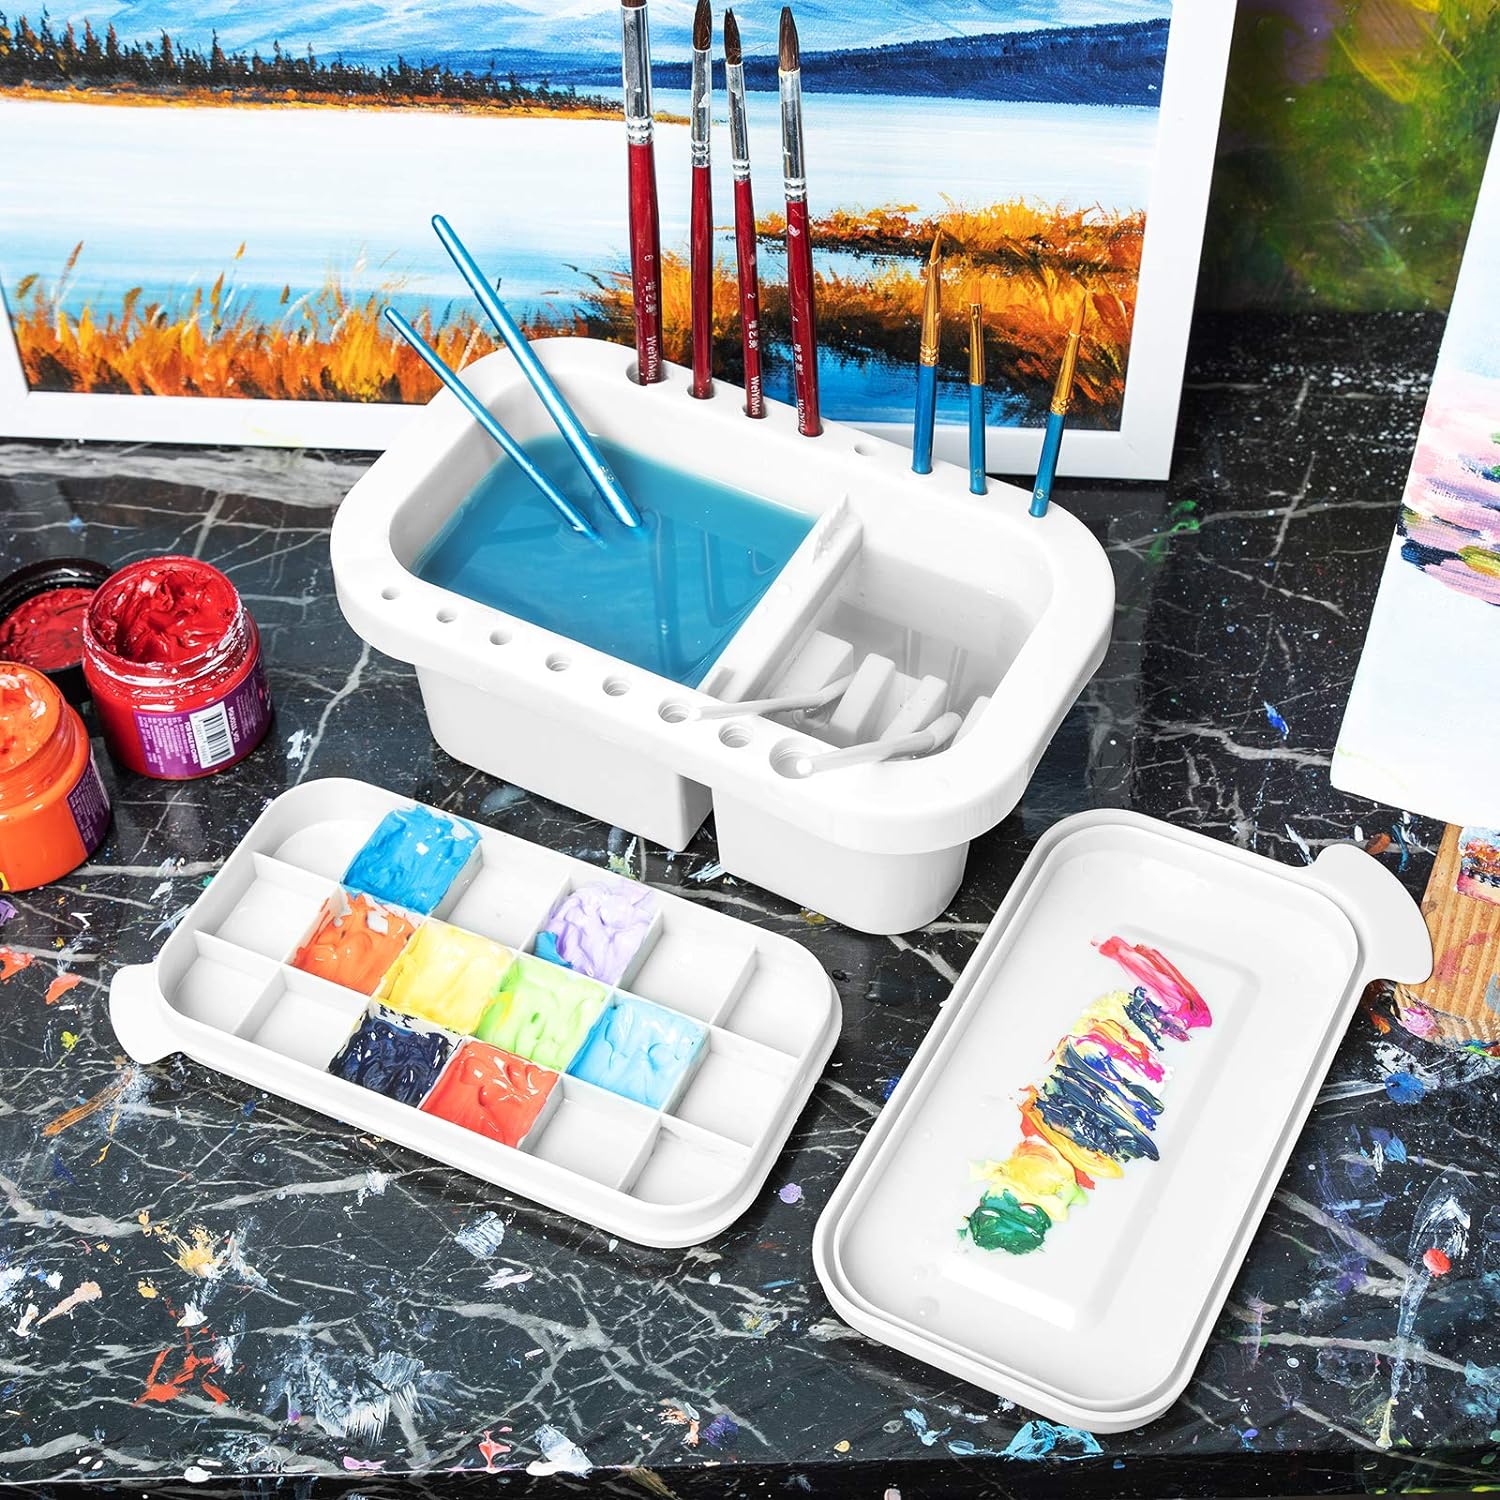 MyLifeUNIT Paint Brush Cleaner, Paint Brush Holder and Organizers with Palette for Acrylic, Watercolor, and Water-Based Paints (Grey)